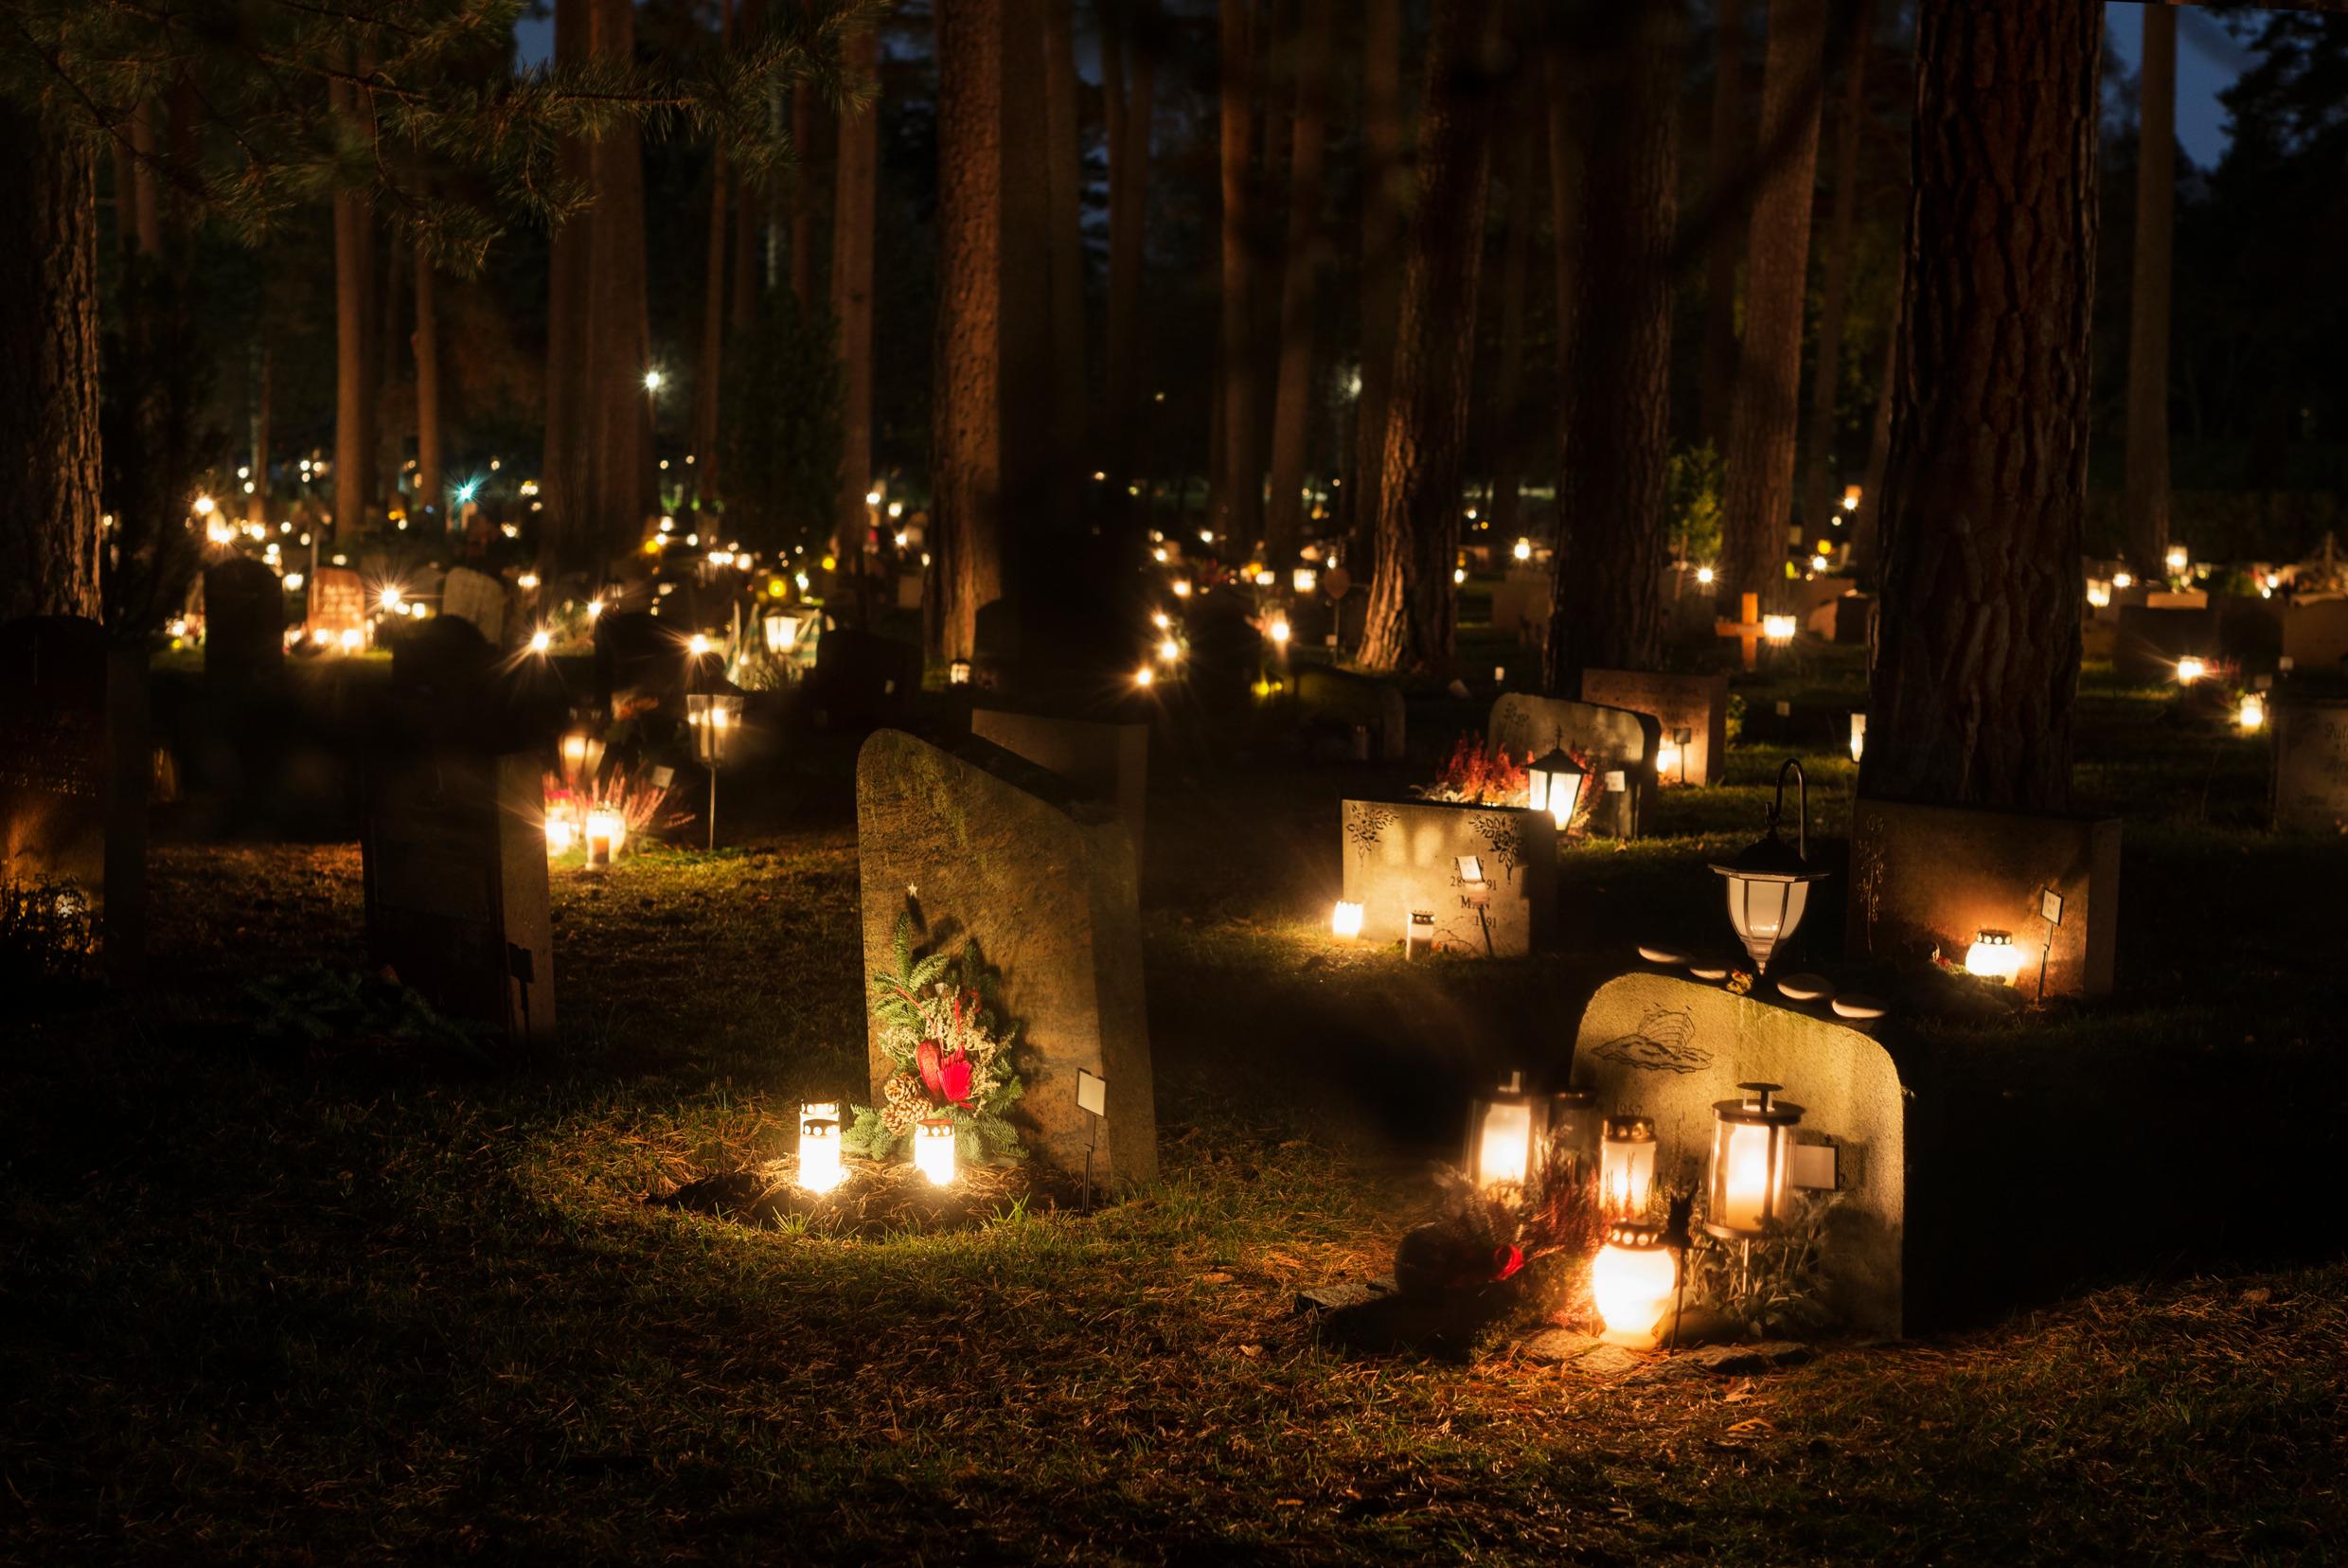 A cemetery with gravestones and candles.